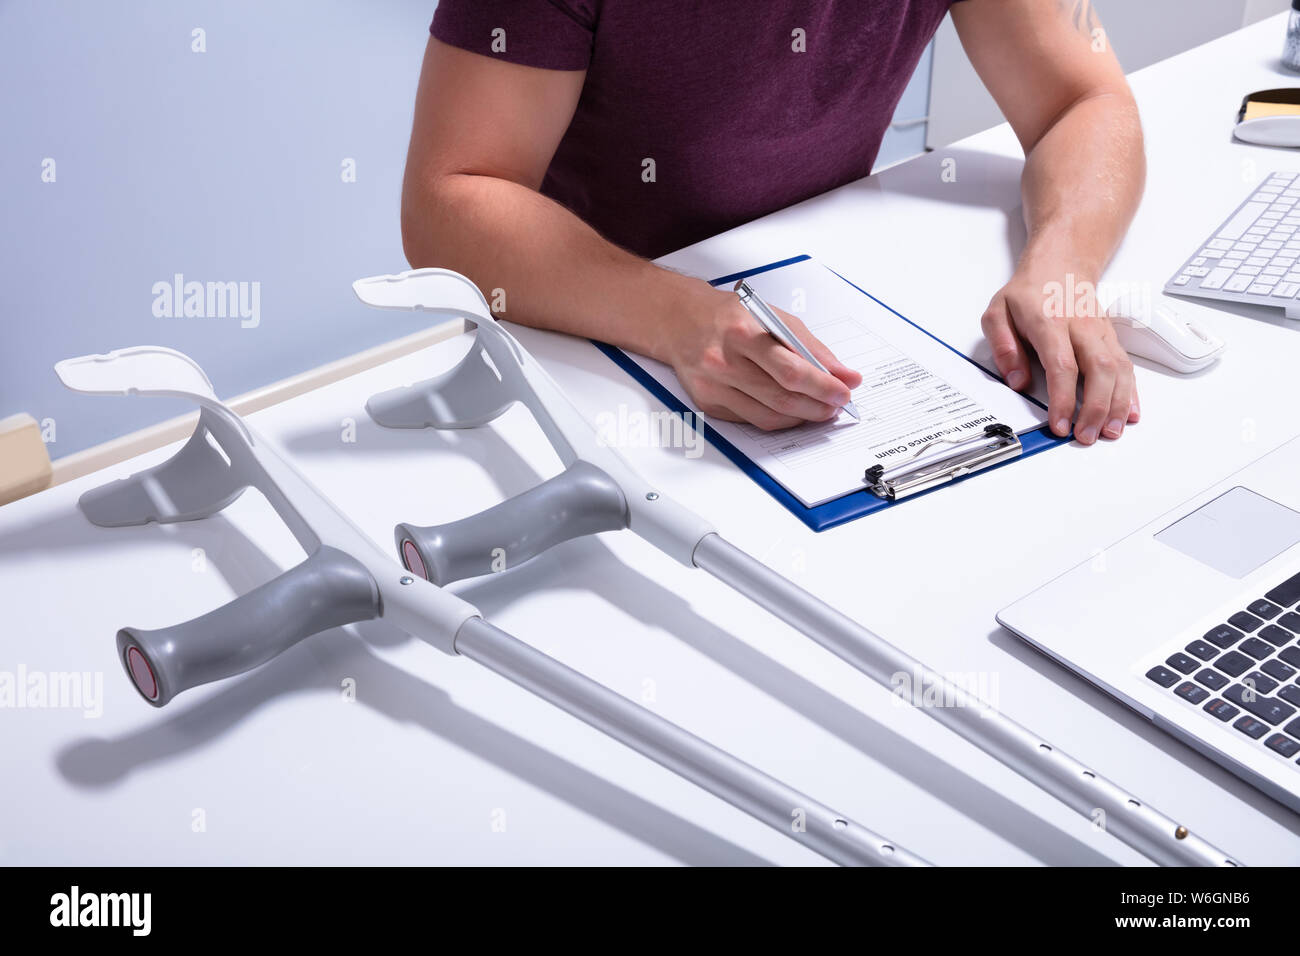 Disabled Male Patient Filling Insurance Claim Form Over Desk With Crutches Stock Photo